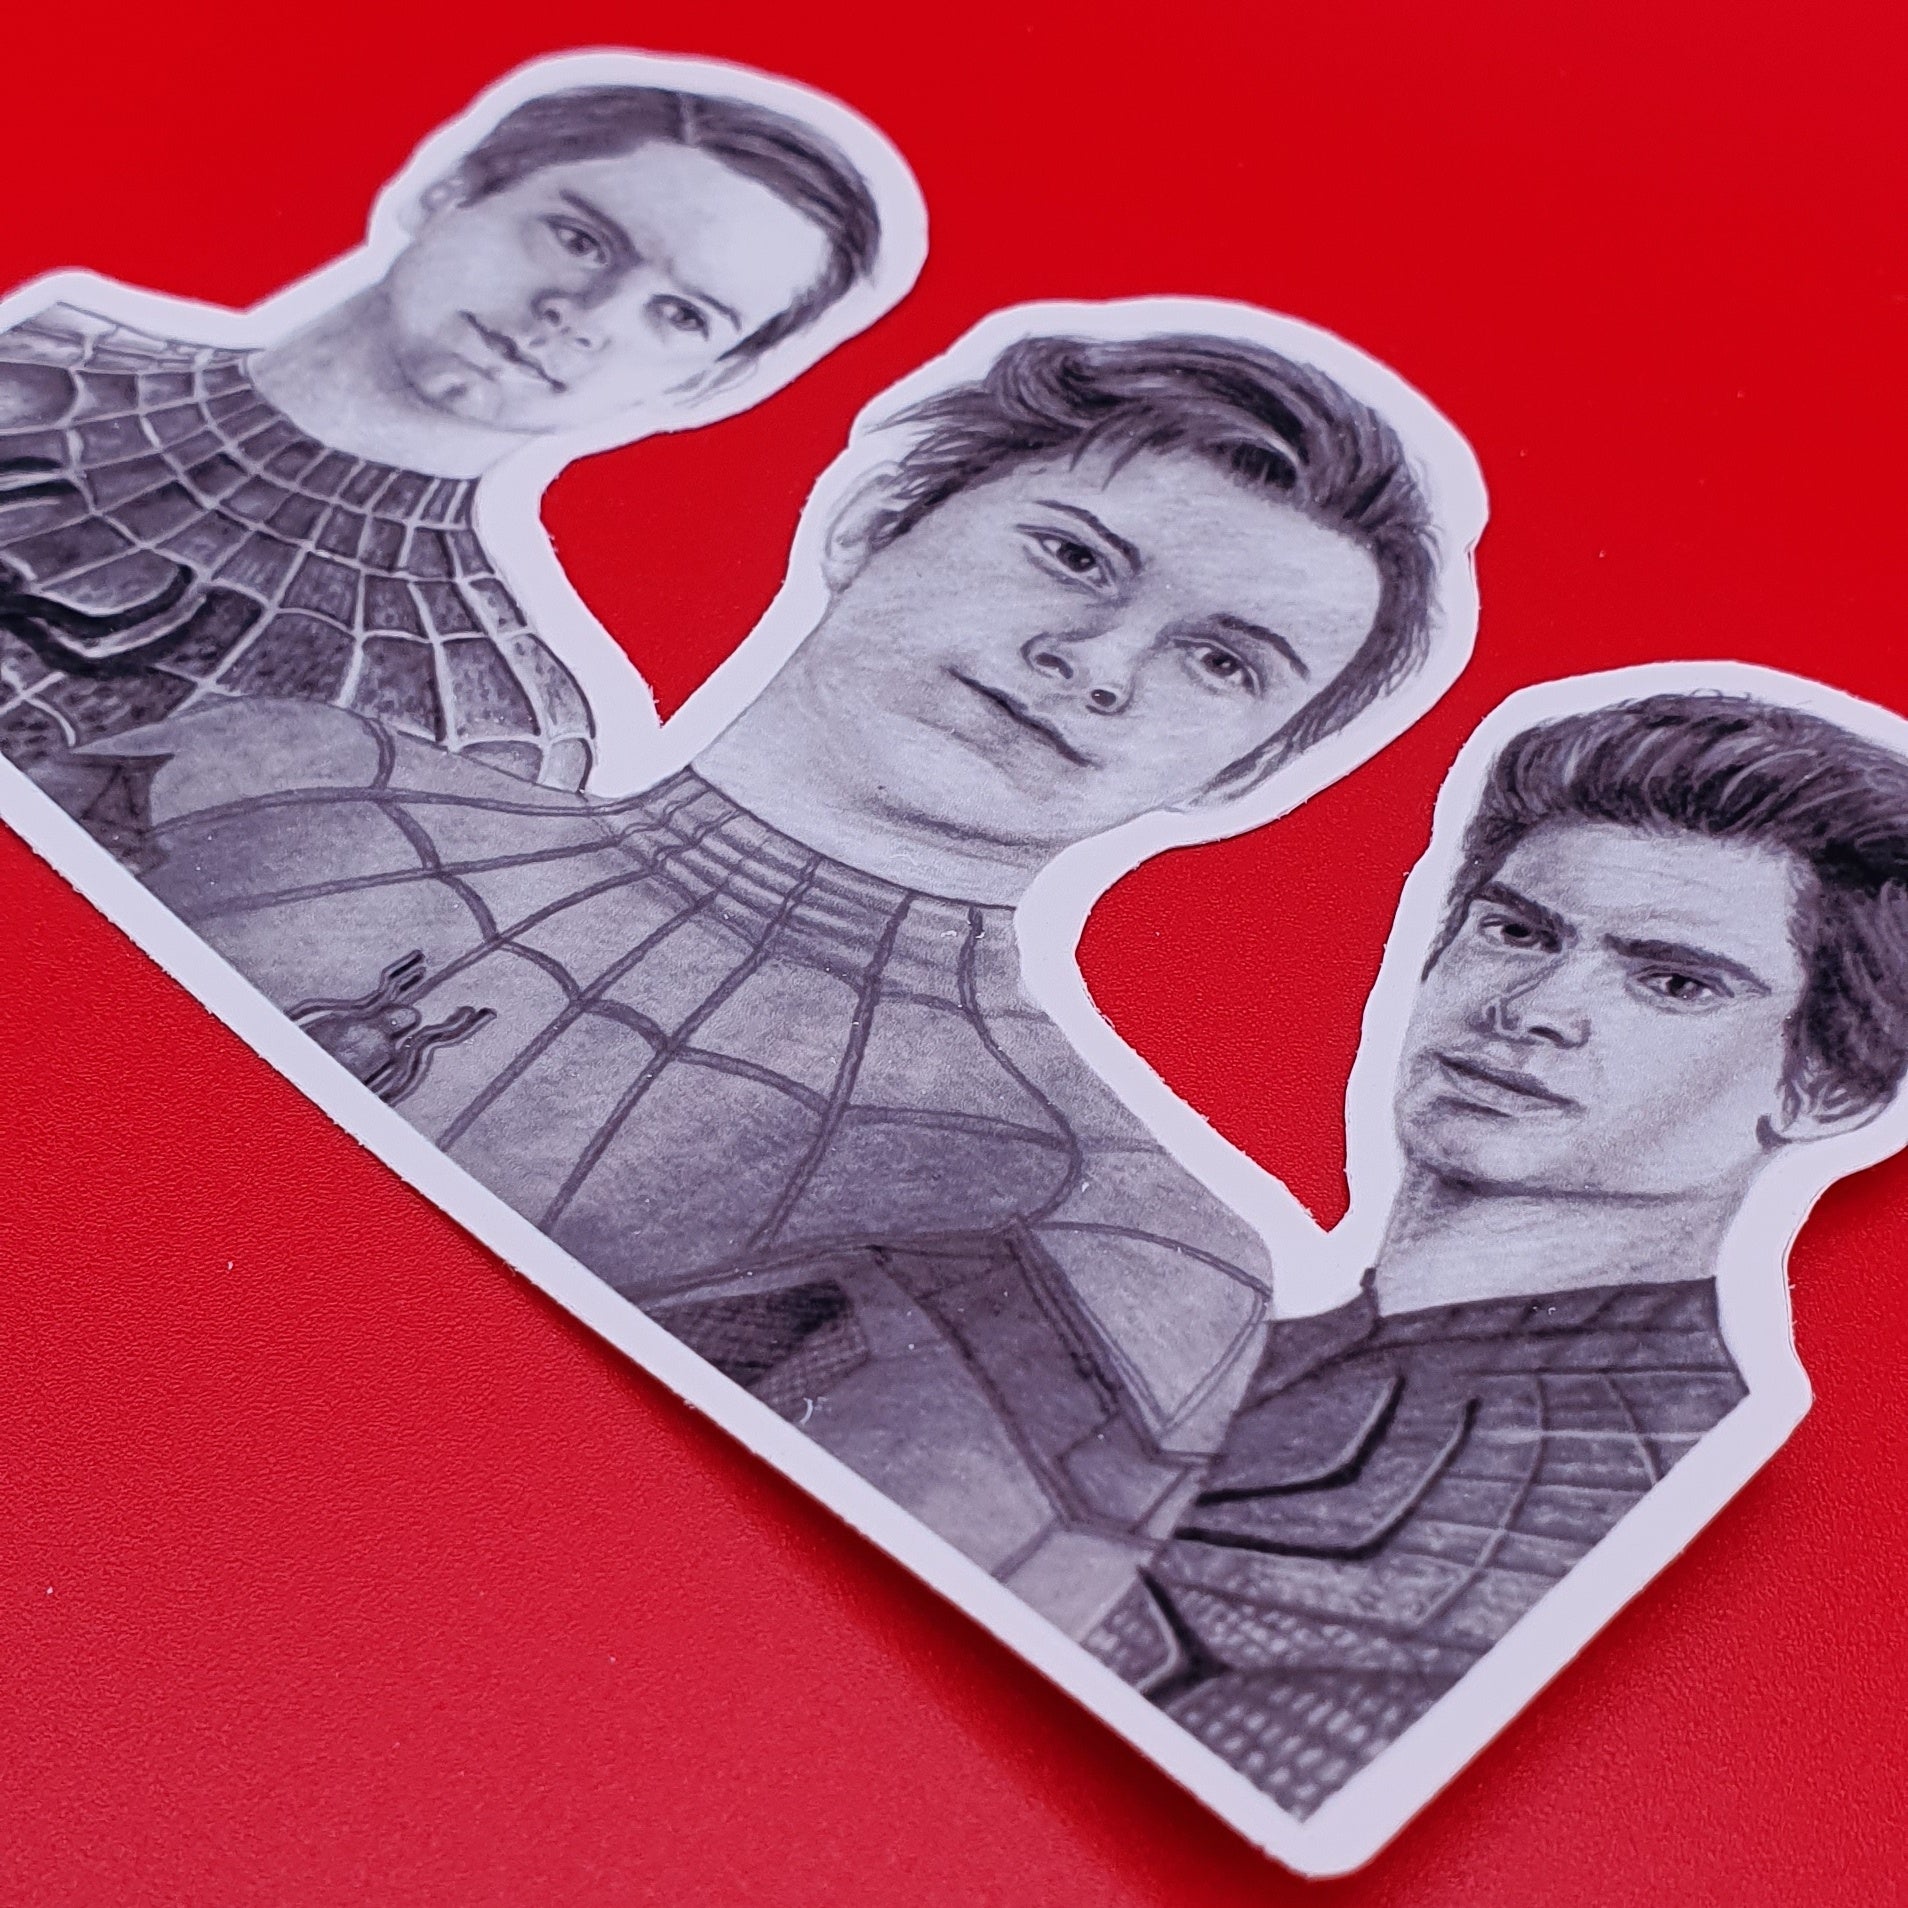 Spiderman Stickers Tobey Maguire.